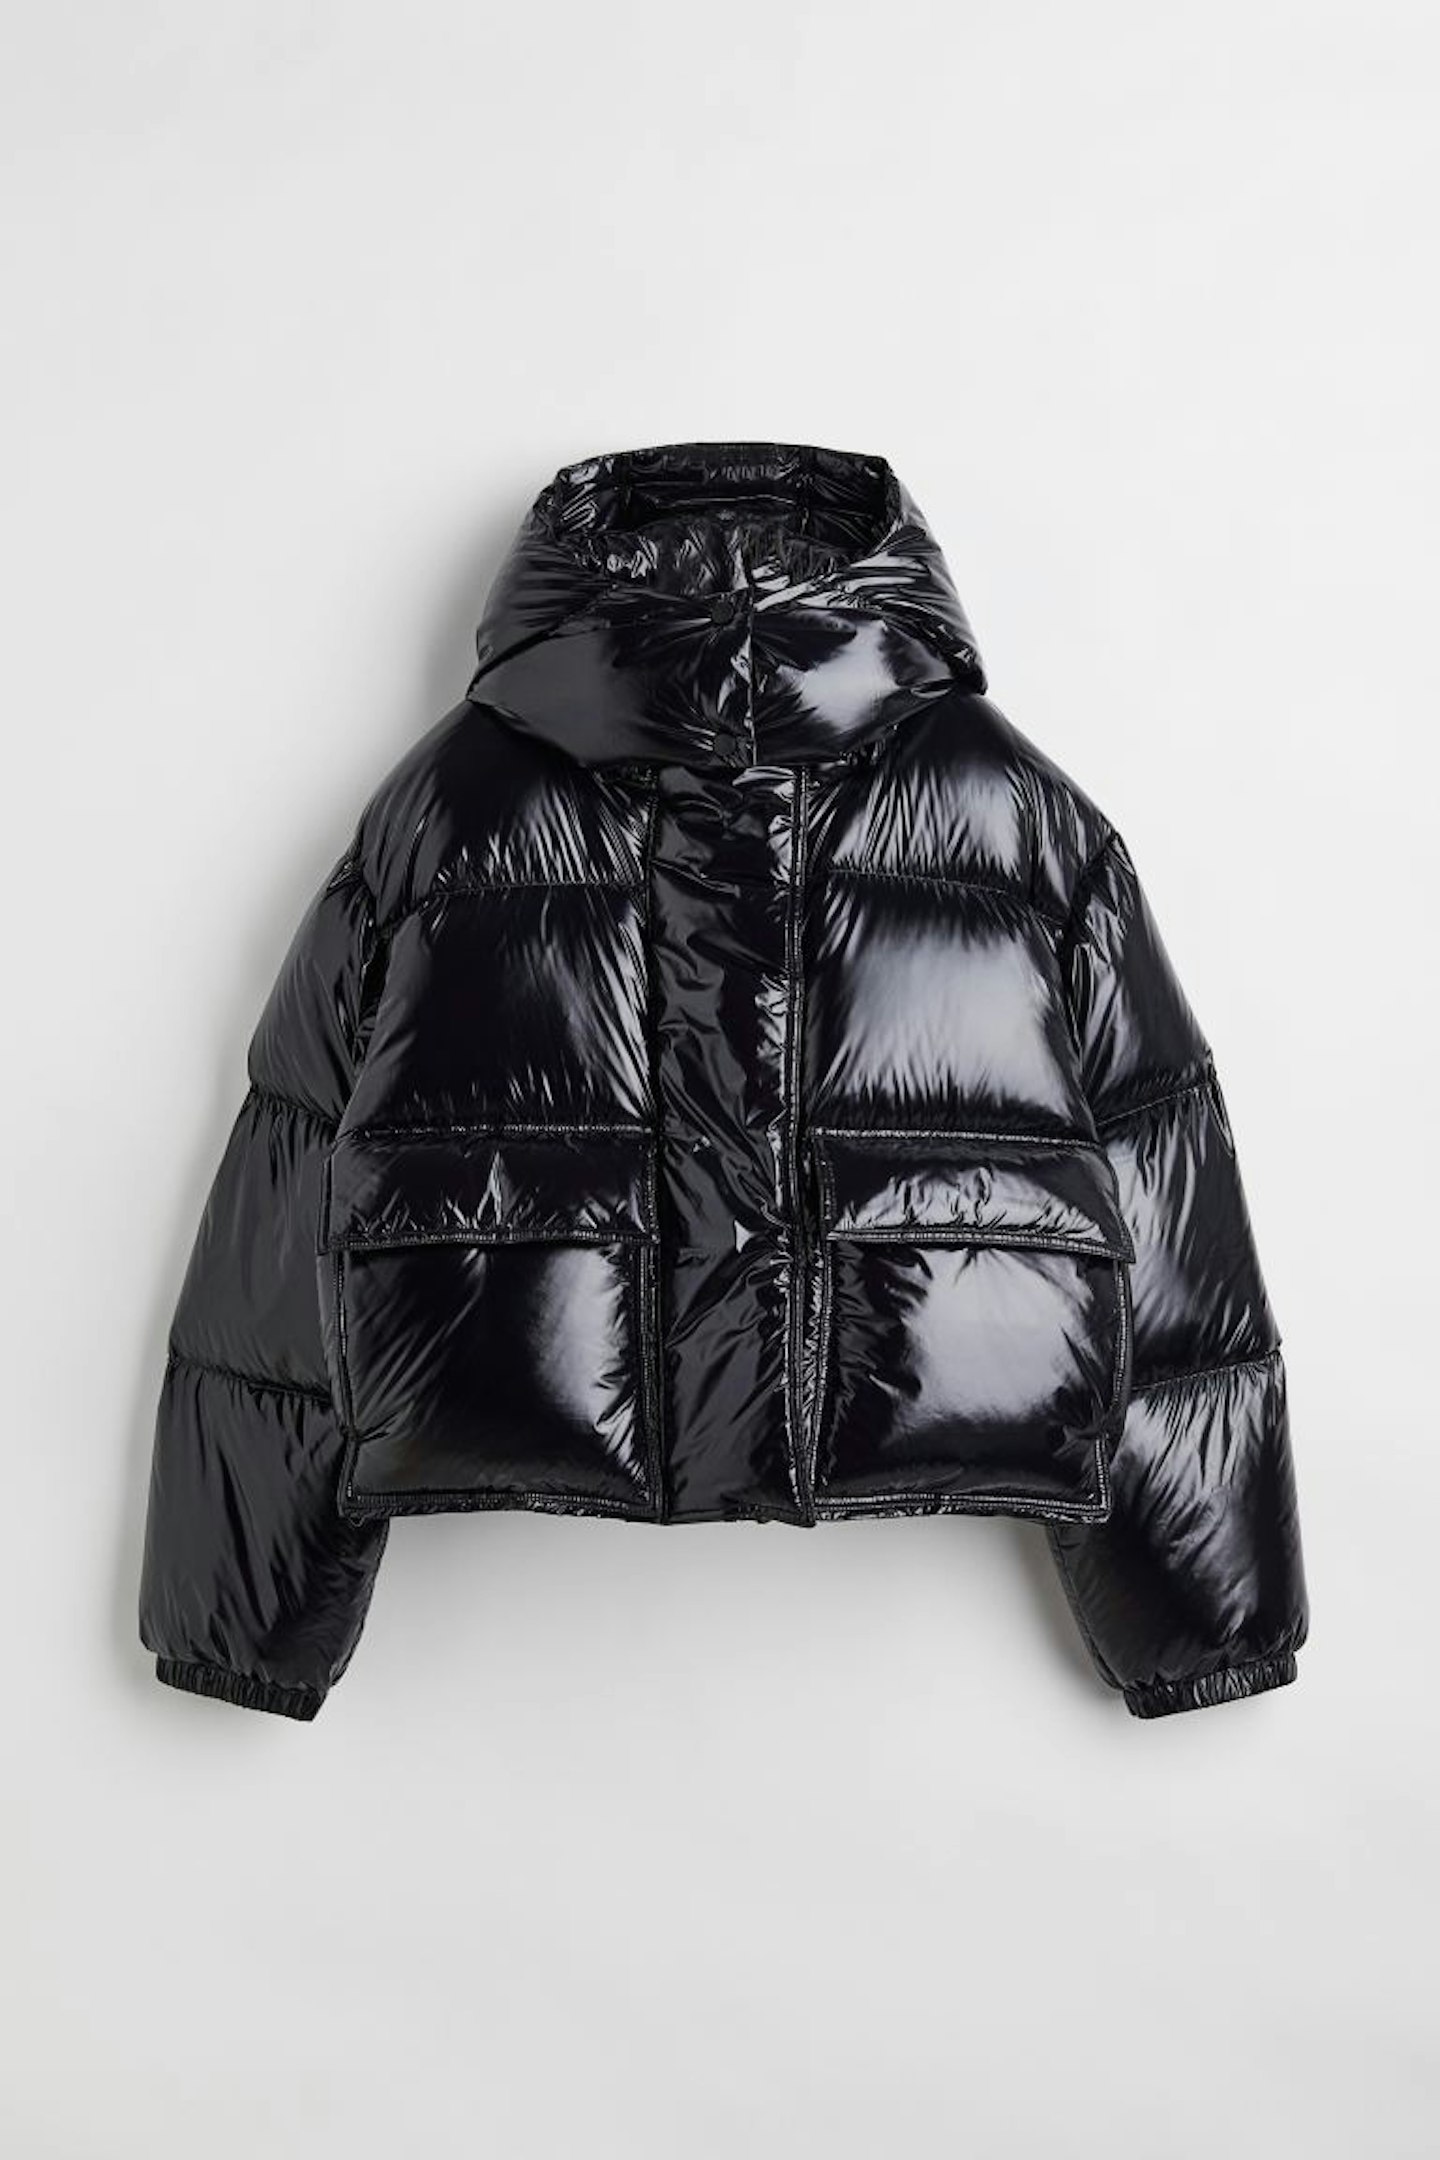 H&M, Hooded Down Jacket